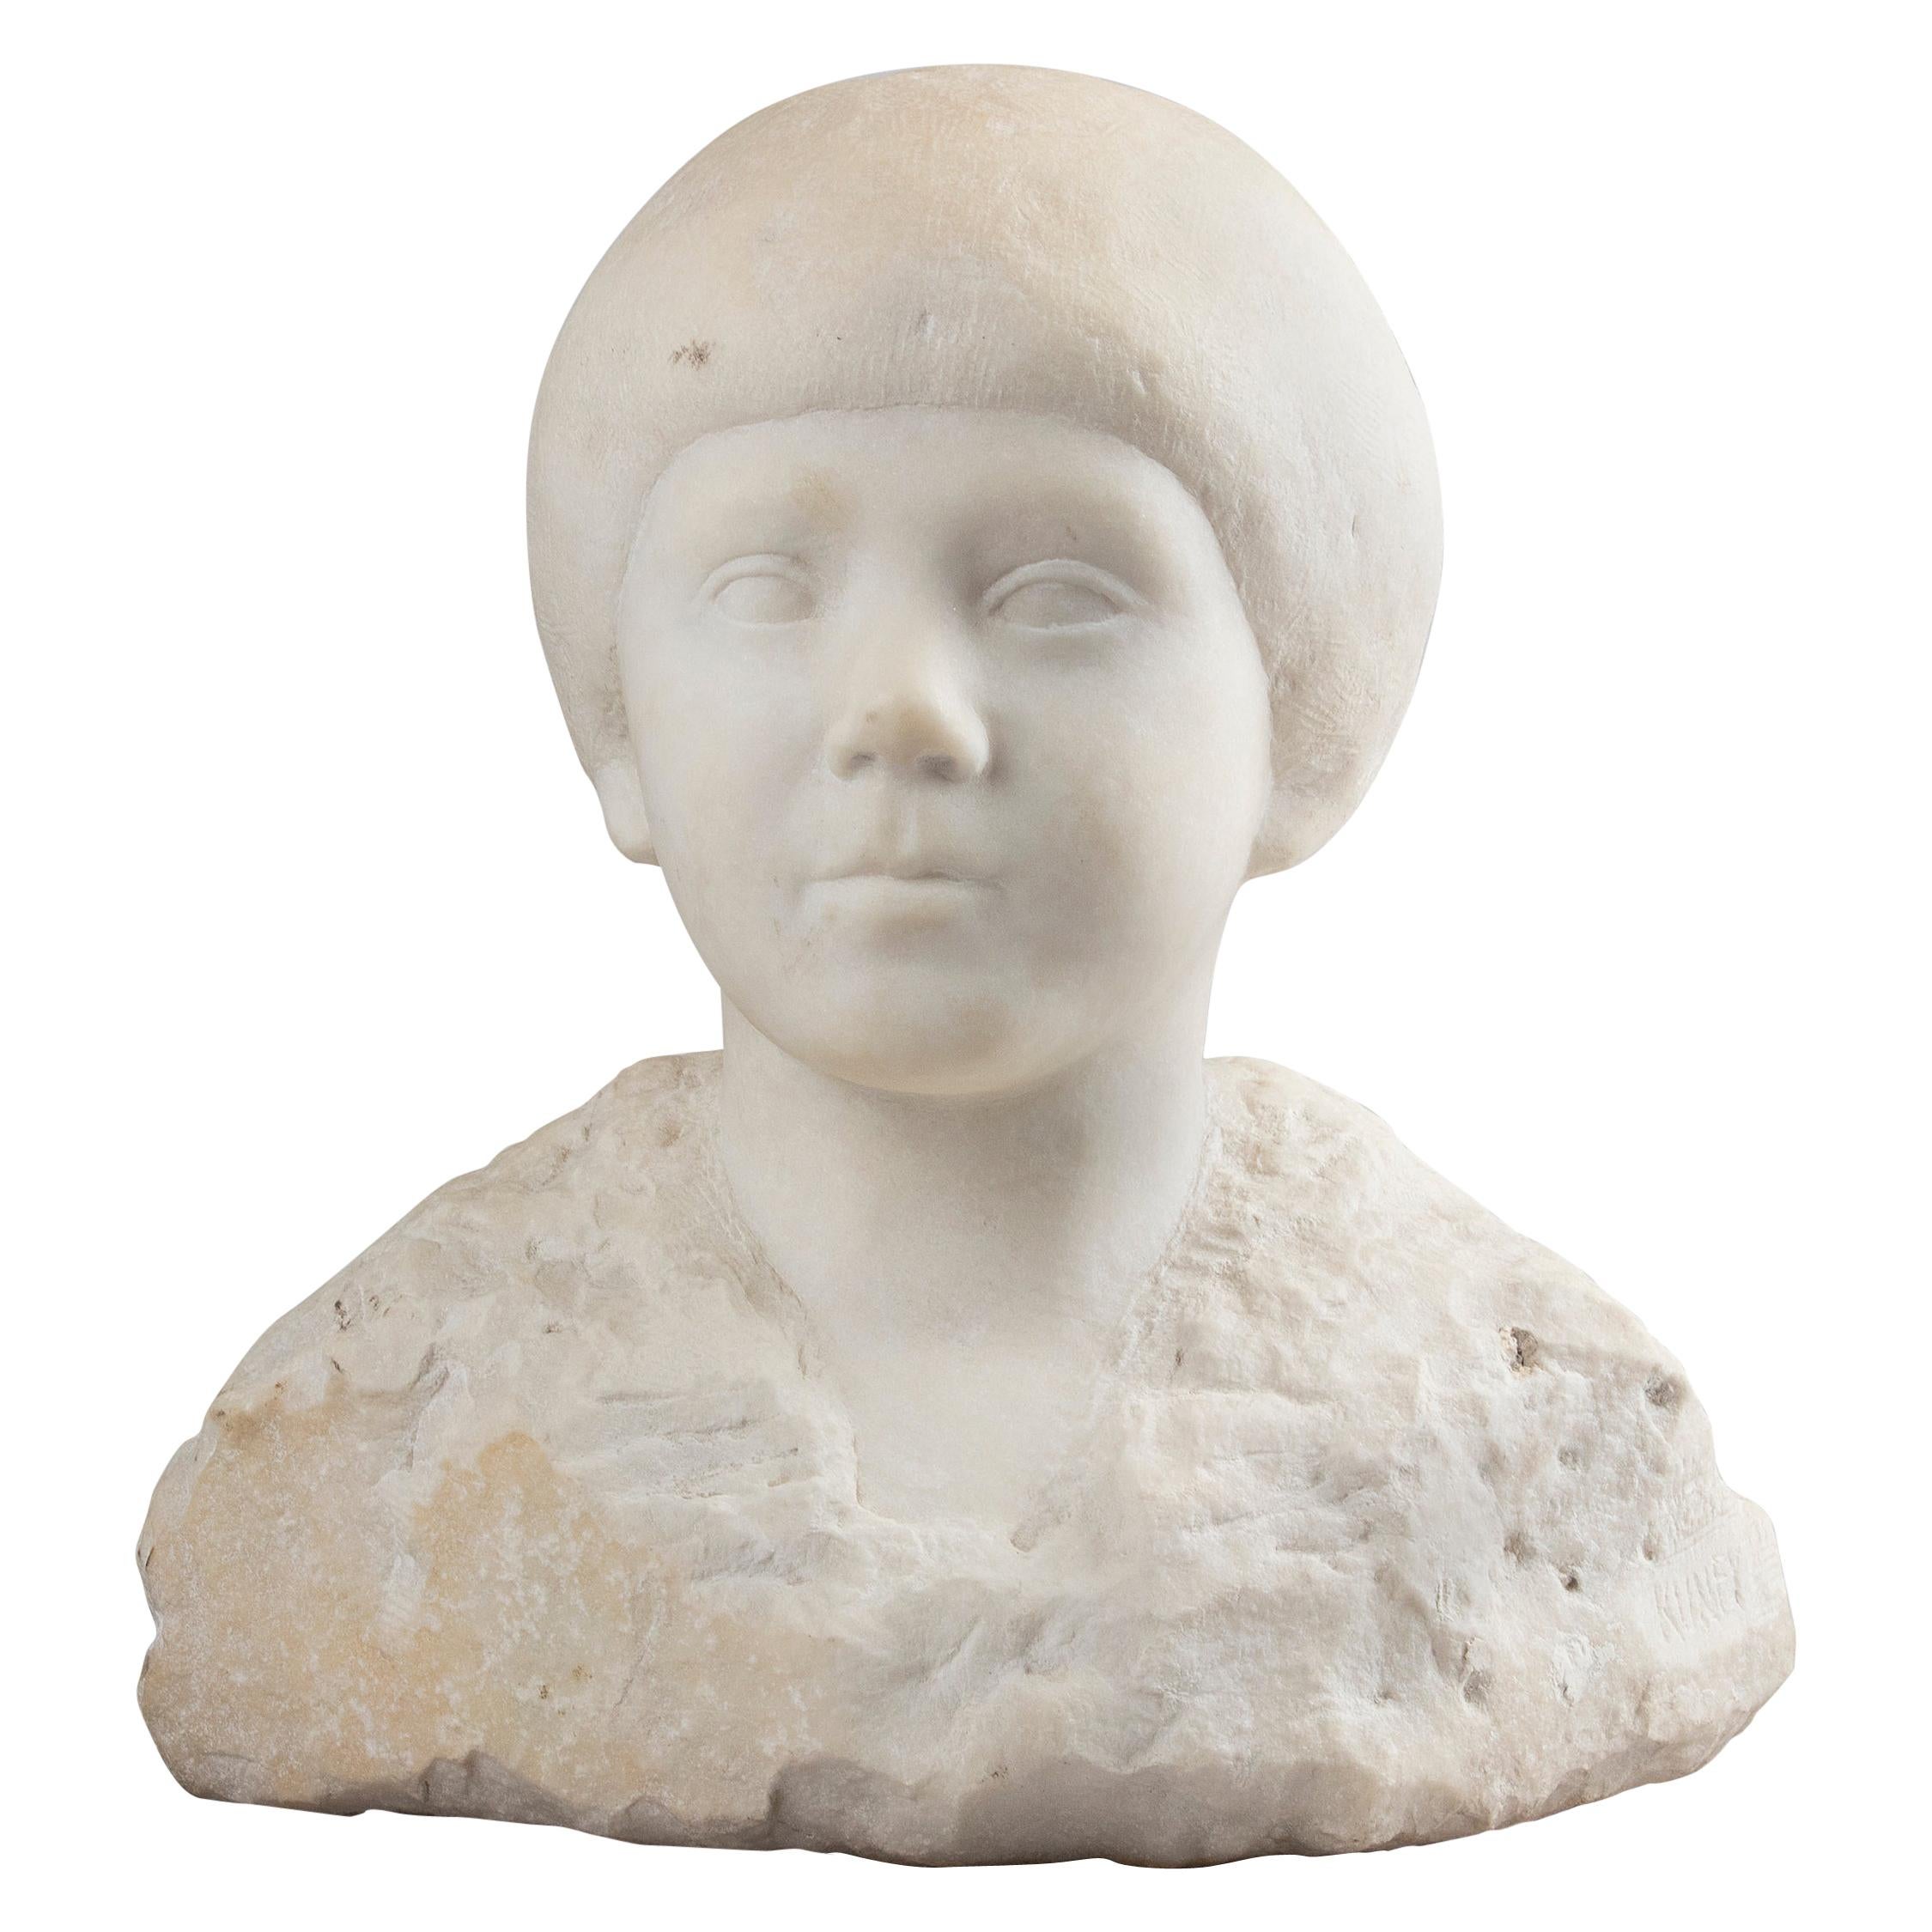 Early 20th Century Modernist Art Deco Statue of a Child Made of Carrara Marble